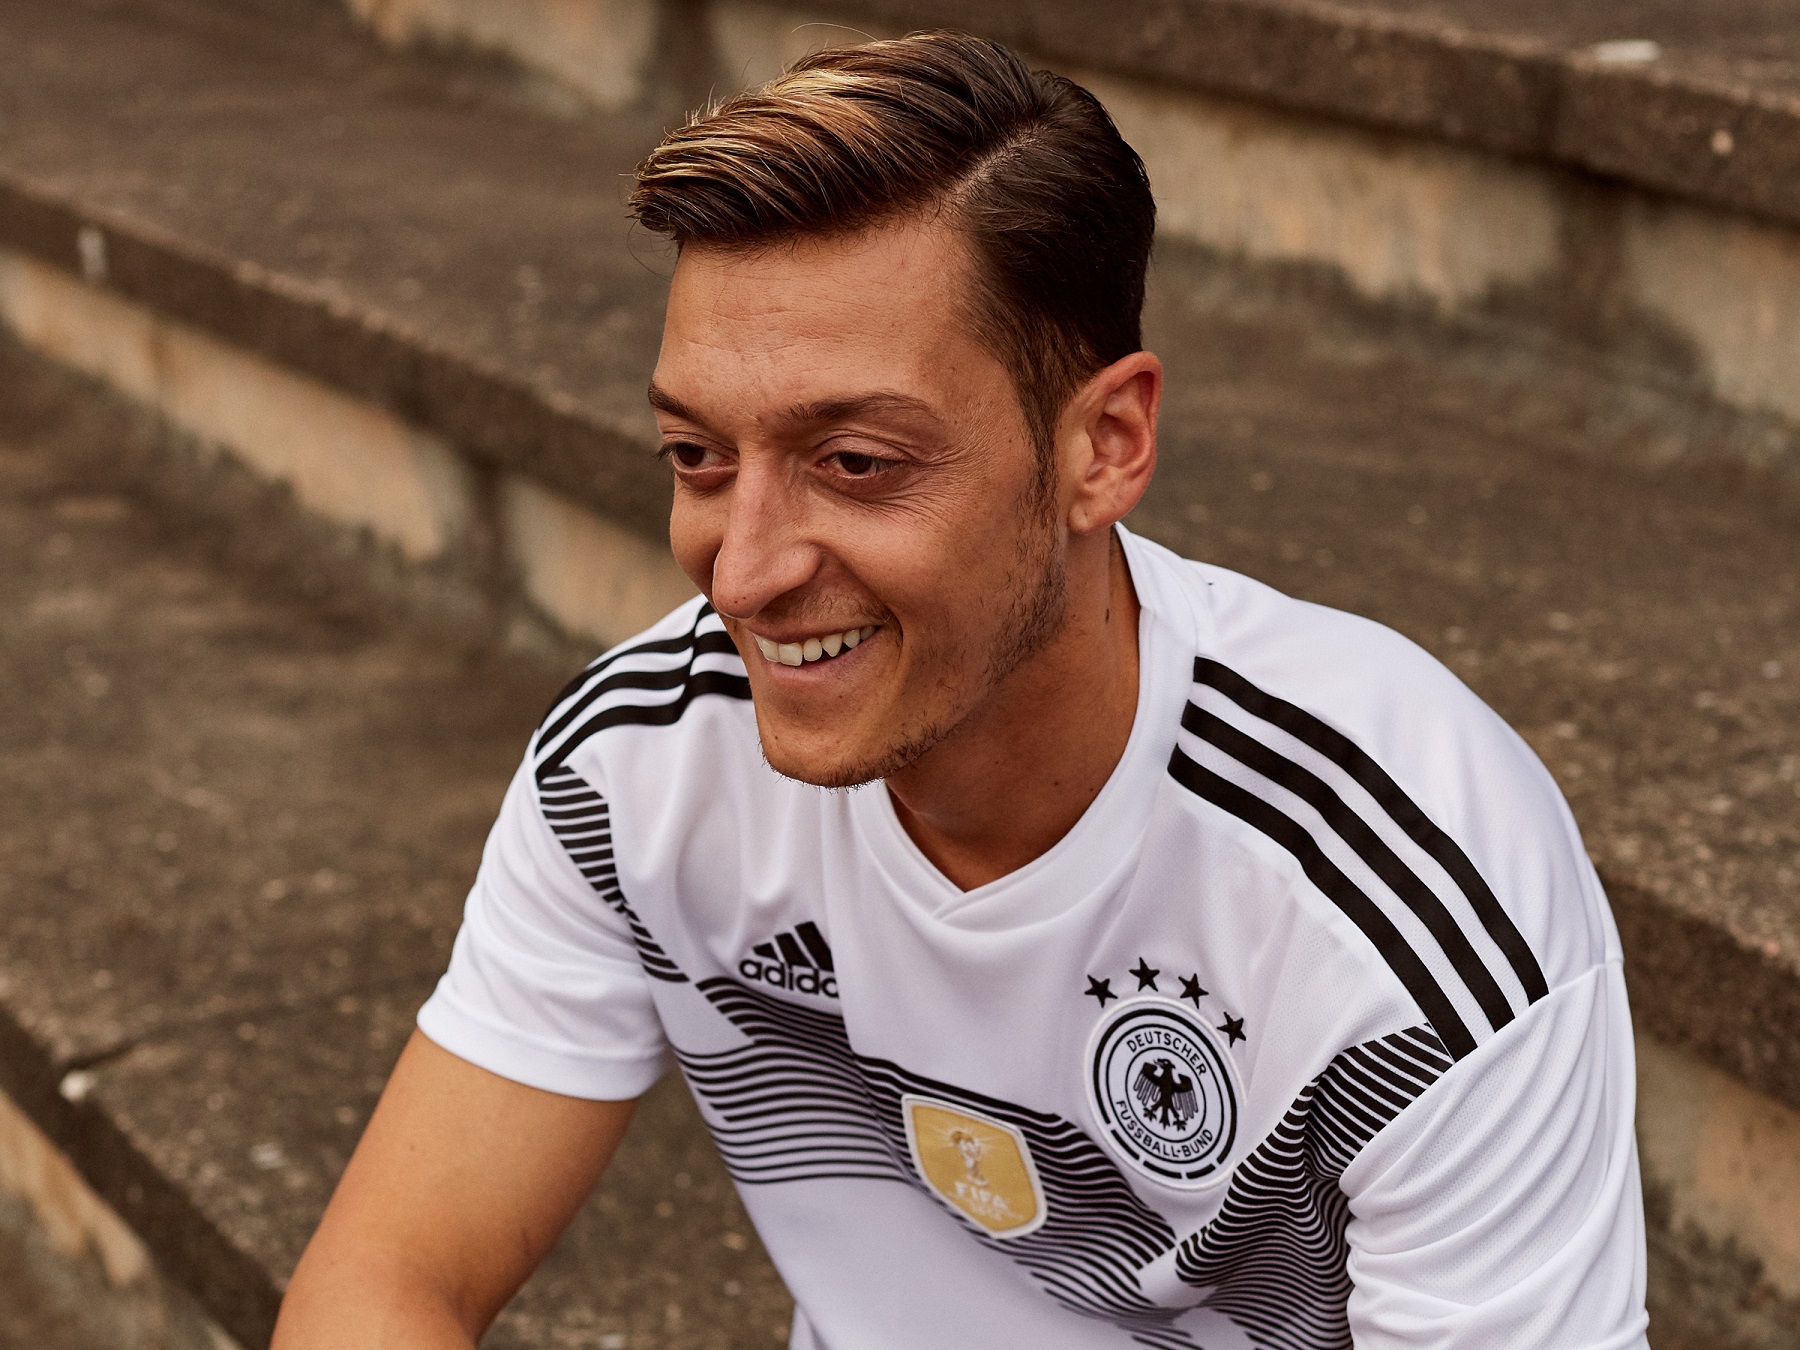 Germany's new home kit for the 2018 World Cup in Russia